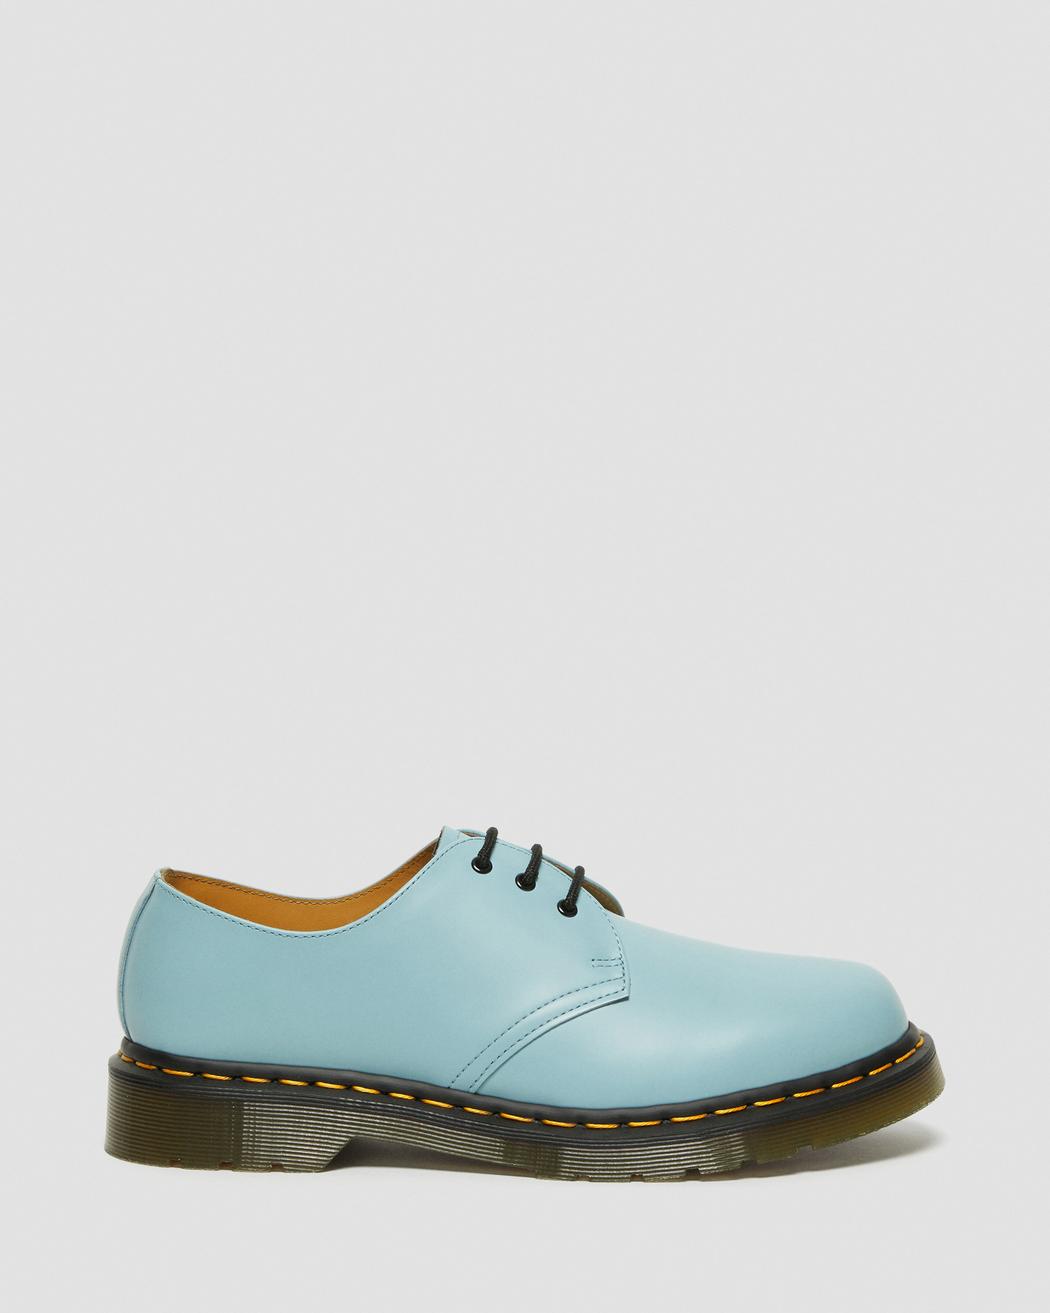 1461 CARD BLUE SMOOTH LEATHER OXFORD SHOES